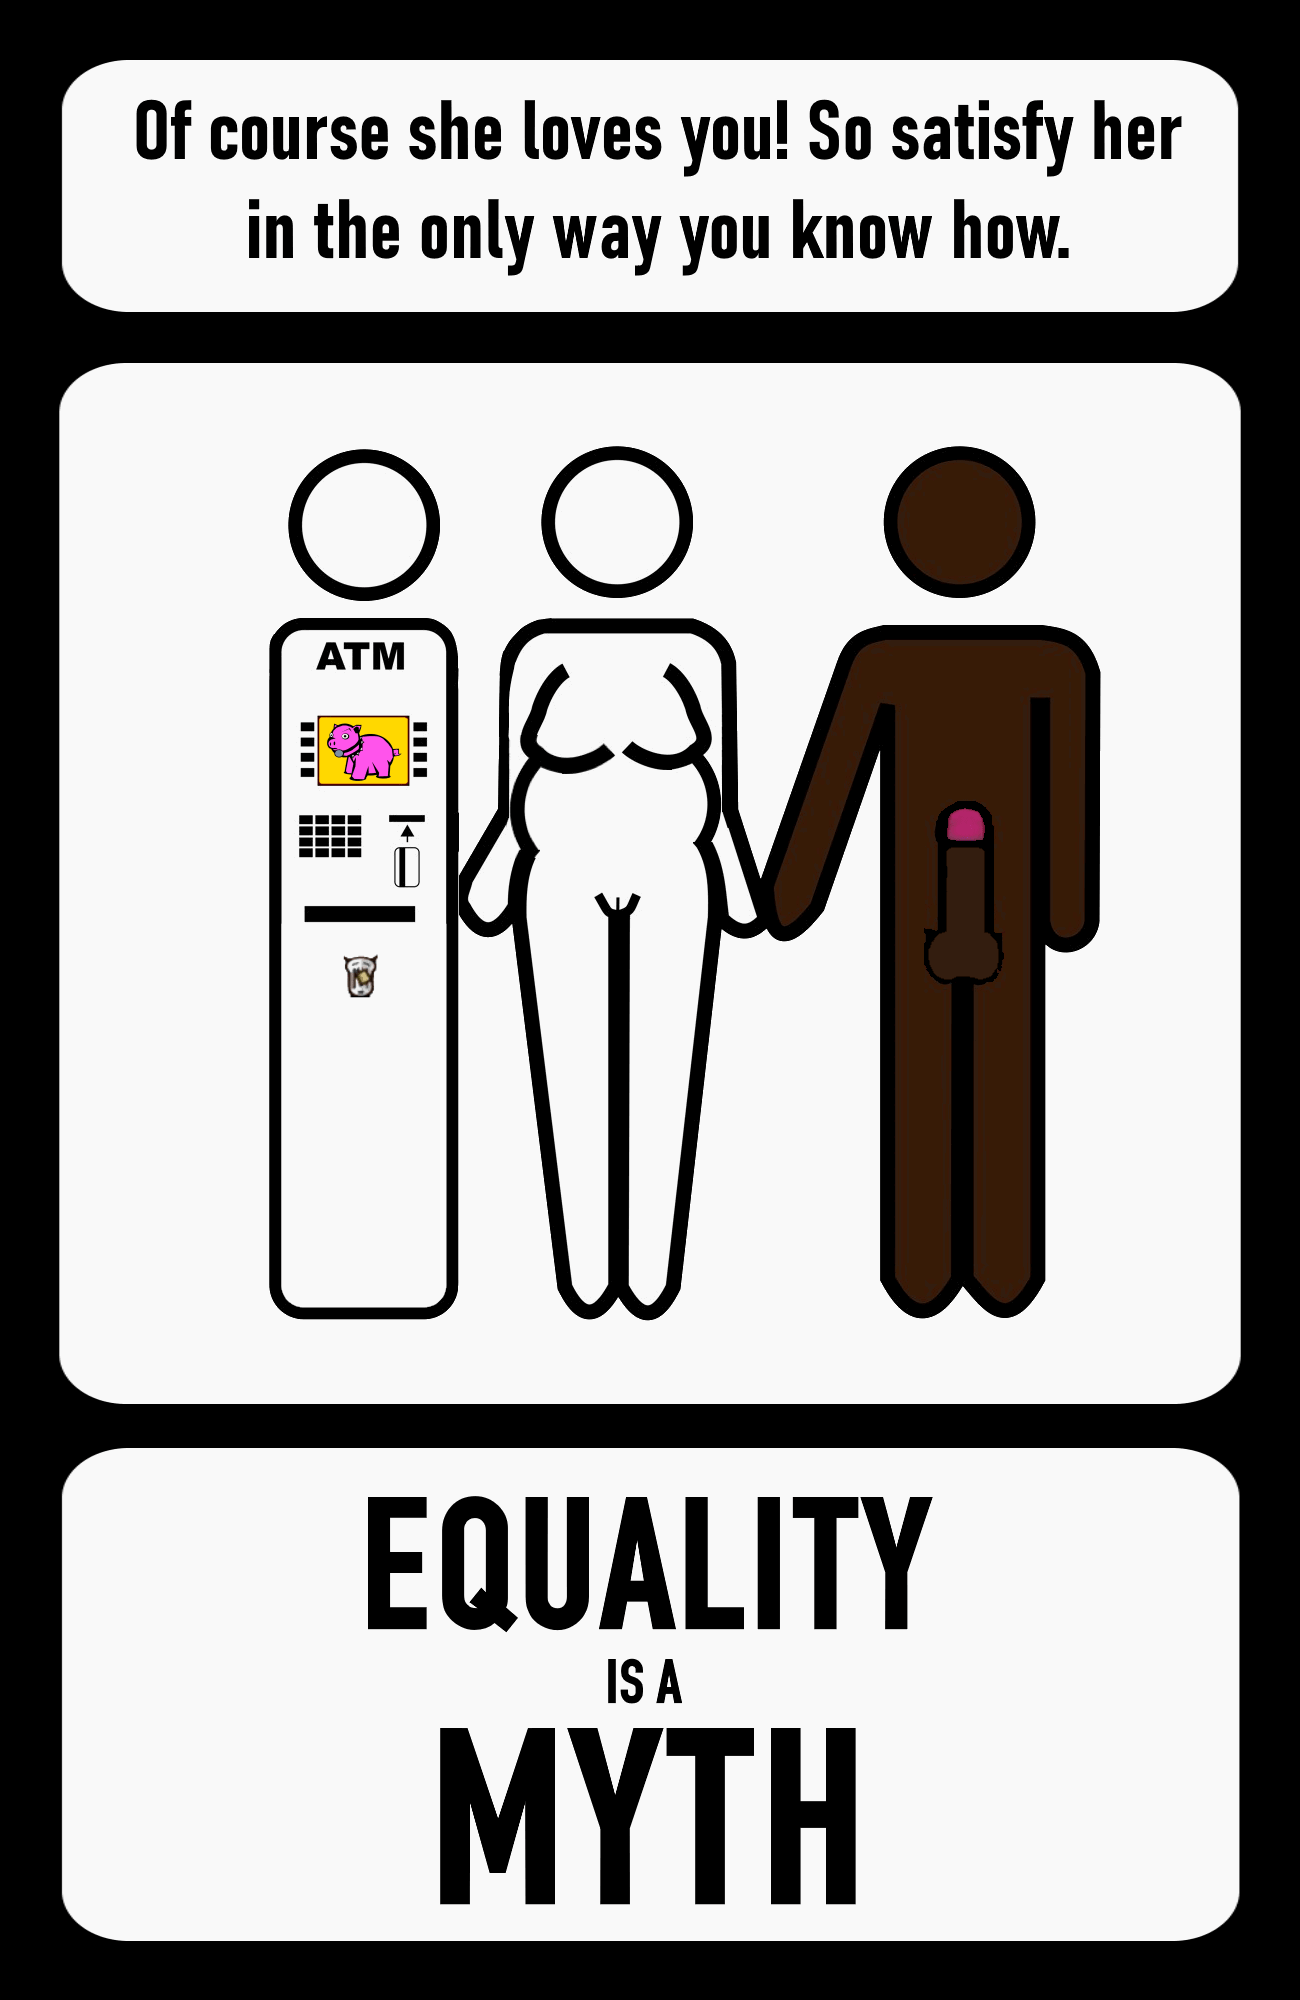 Photo by Nutzvieh with the username @nutzvieh, who is a verified user,  November 8, 2022 at 7:10 PM. The post is about the topic Pictograms - Piktogramme and the text says 'Gleichheit ist ein Mythos - Equality is a myth'